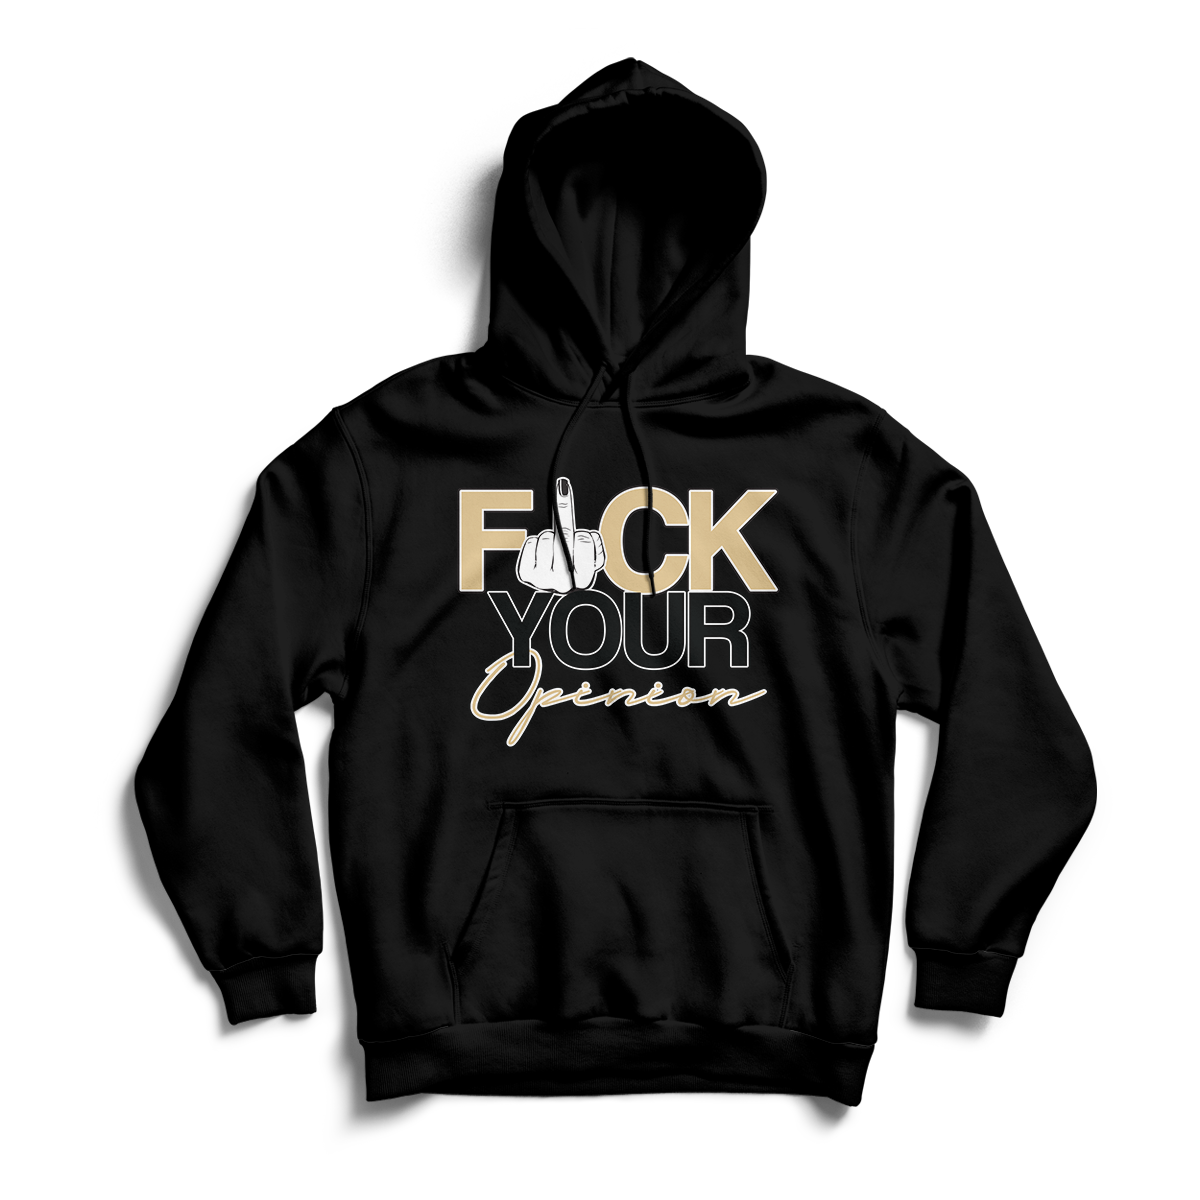 'F**K Your Opinion' in Mushroom CW Unisex Pullover Hoodie